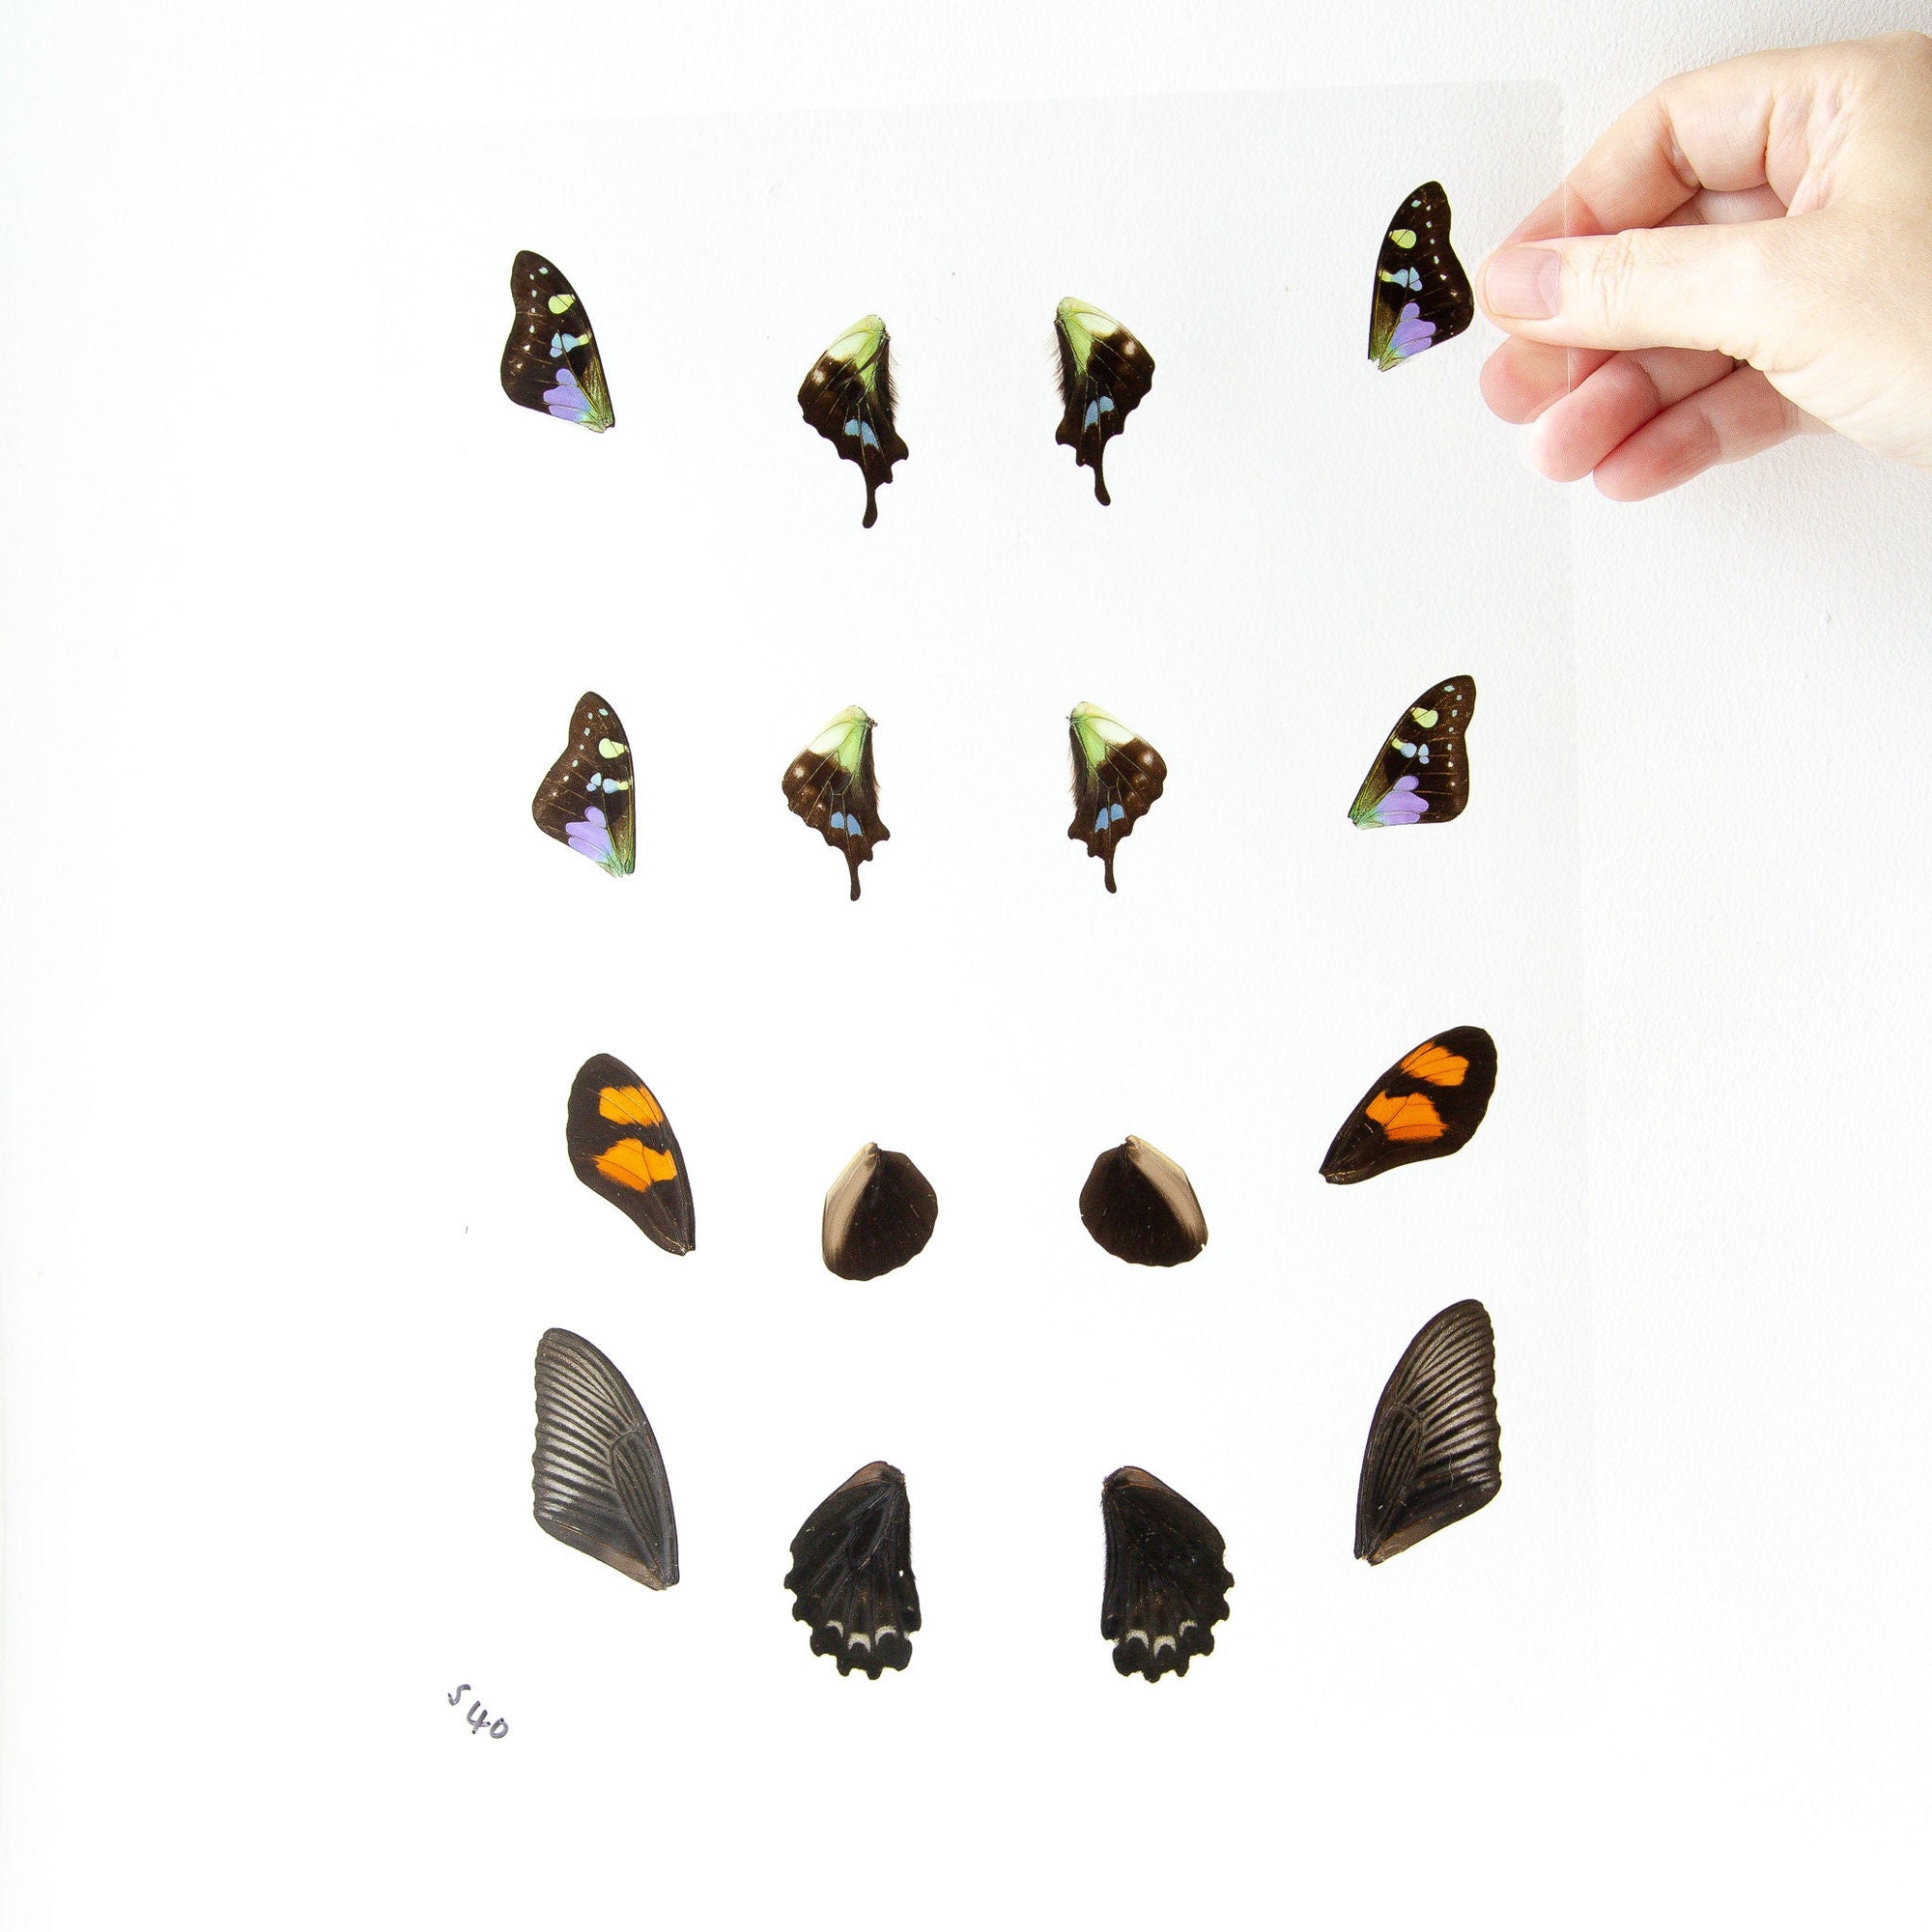 Butterfly Wings GLOSSY LAMINATED SHEET Real Ethically Sourced Specimens Moths Butterflies Wings for Art -- S40